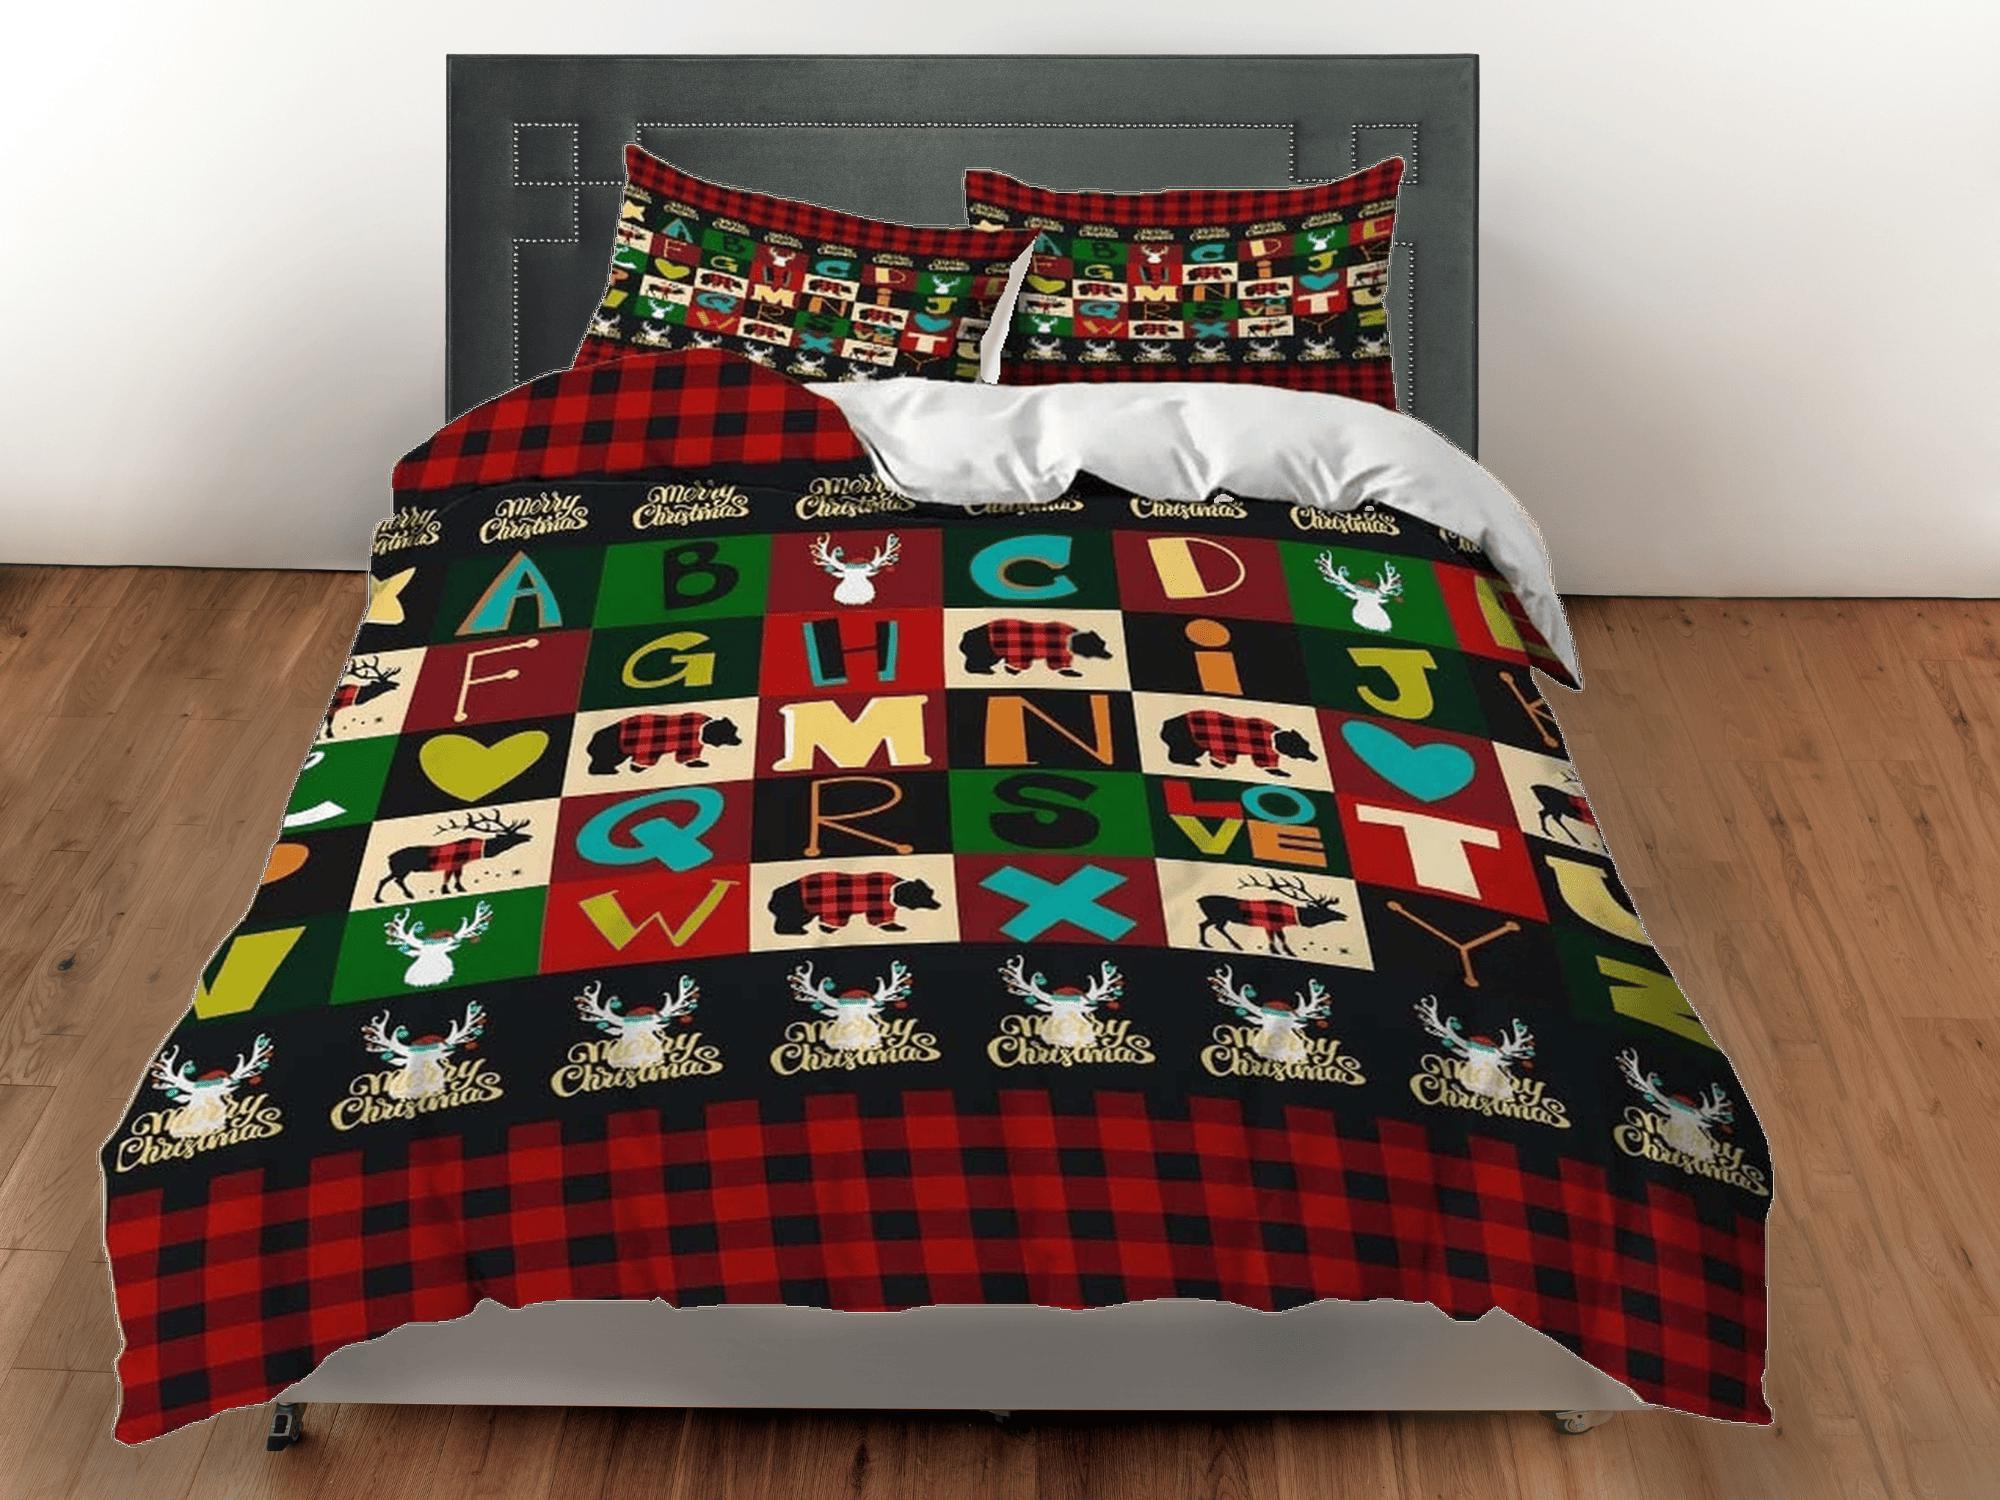 daintyduvet Colorful alphabet red plaid duvet cover set christmas full size bedding & pillowcase, college bedding, crib toddler bedding, holiday gift